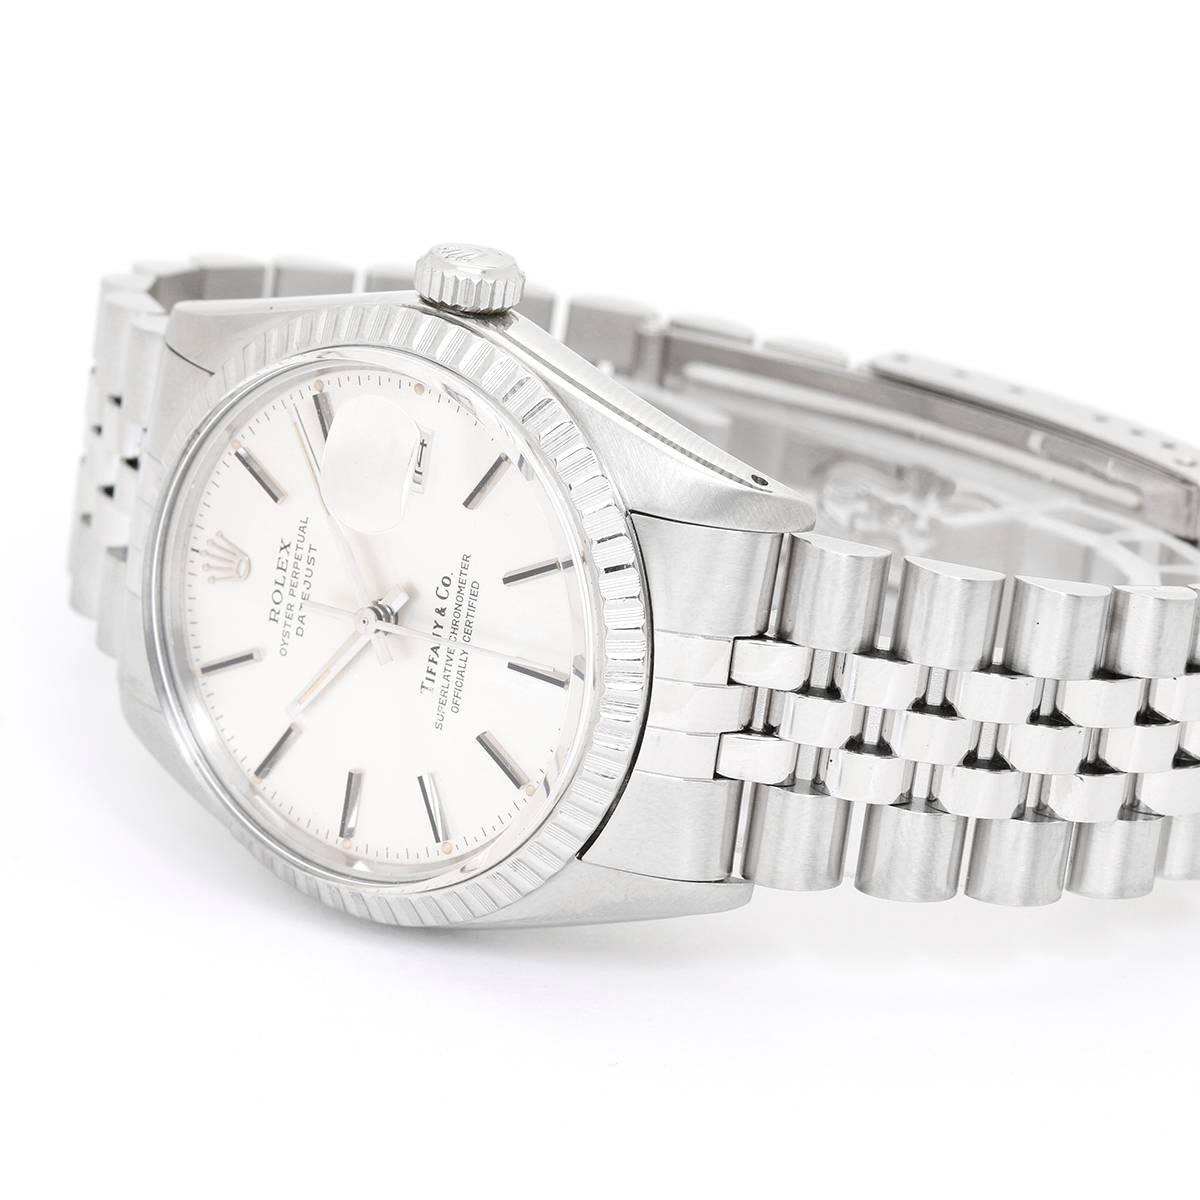 Rolex X Tiffany & Co.  Datejust Men's Steel Watch 16030 -  Automatic winding with date; acrylic crystal. Stainless steel case (36mm diameter)  with engine turned bezel; Original Tiffany & Co. Sticker on case. Silver tone with stick hour